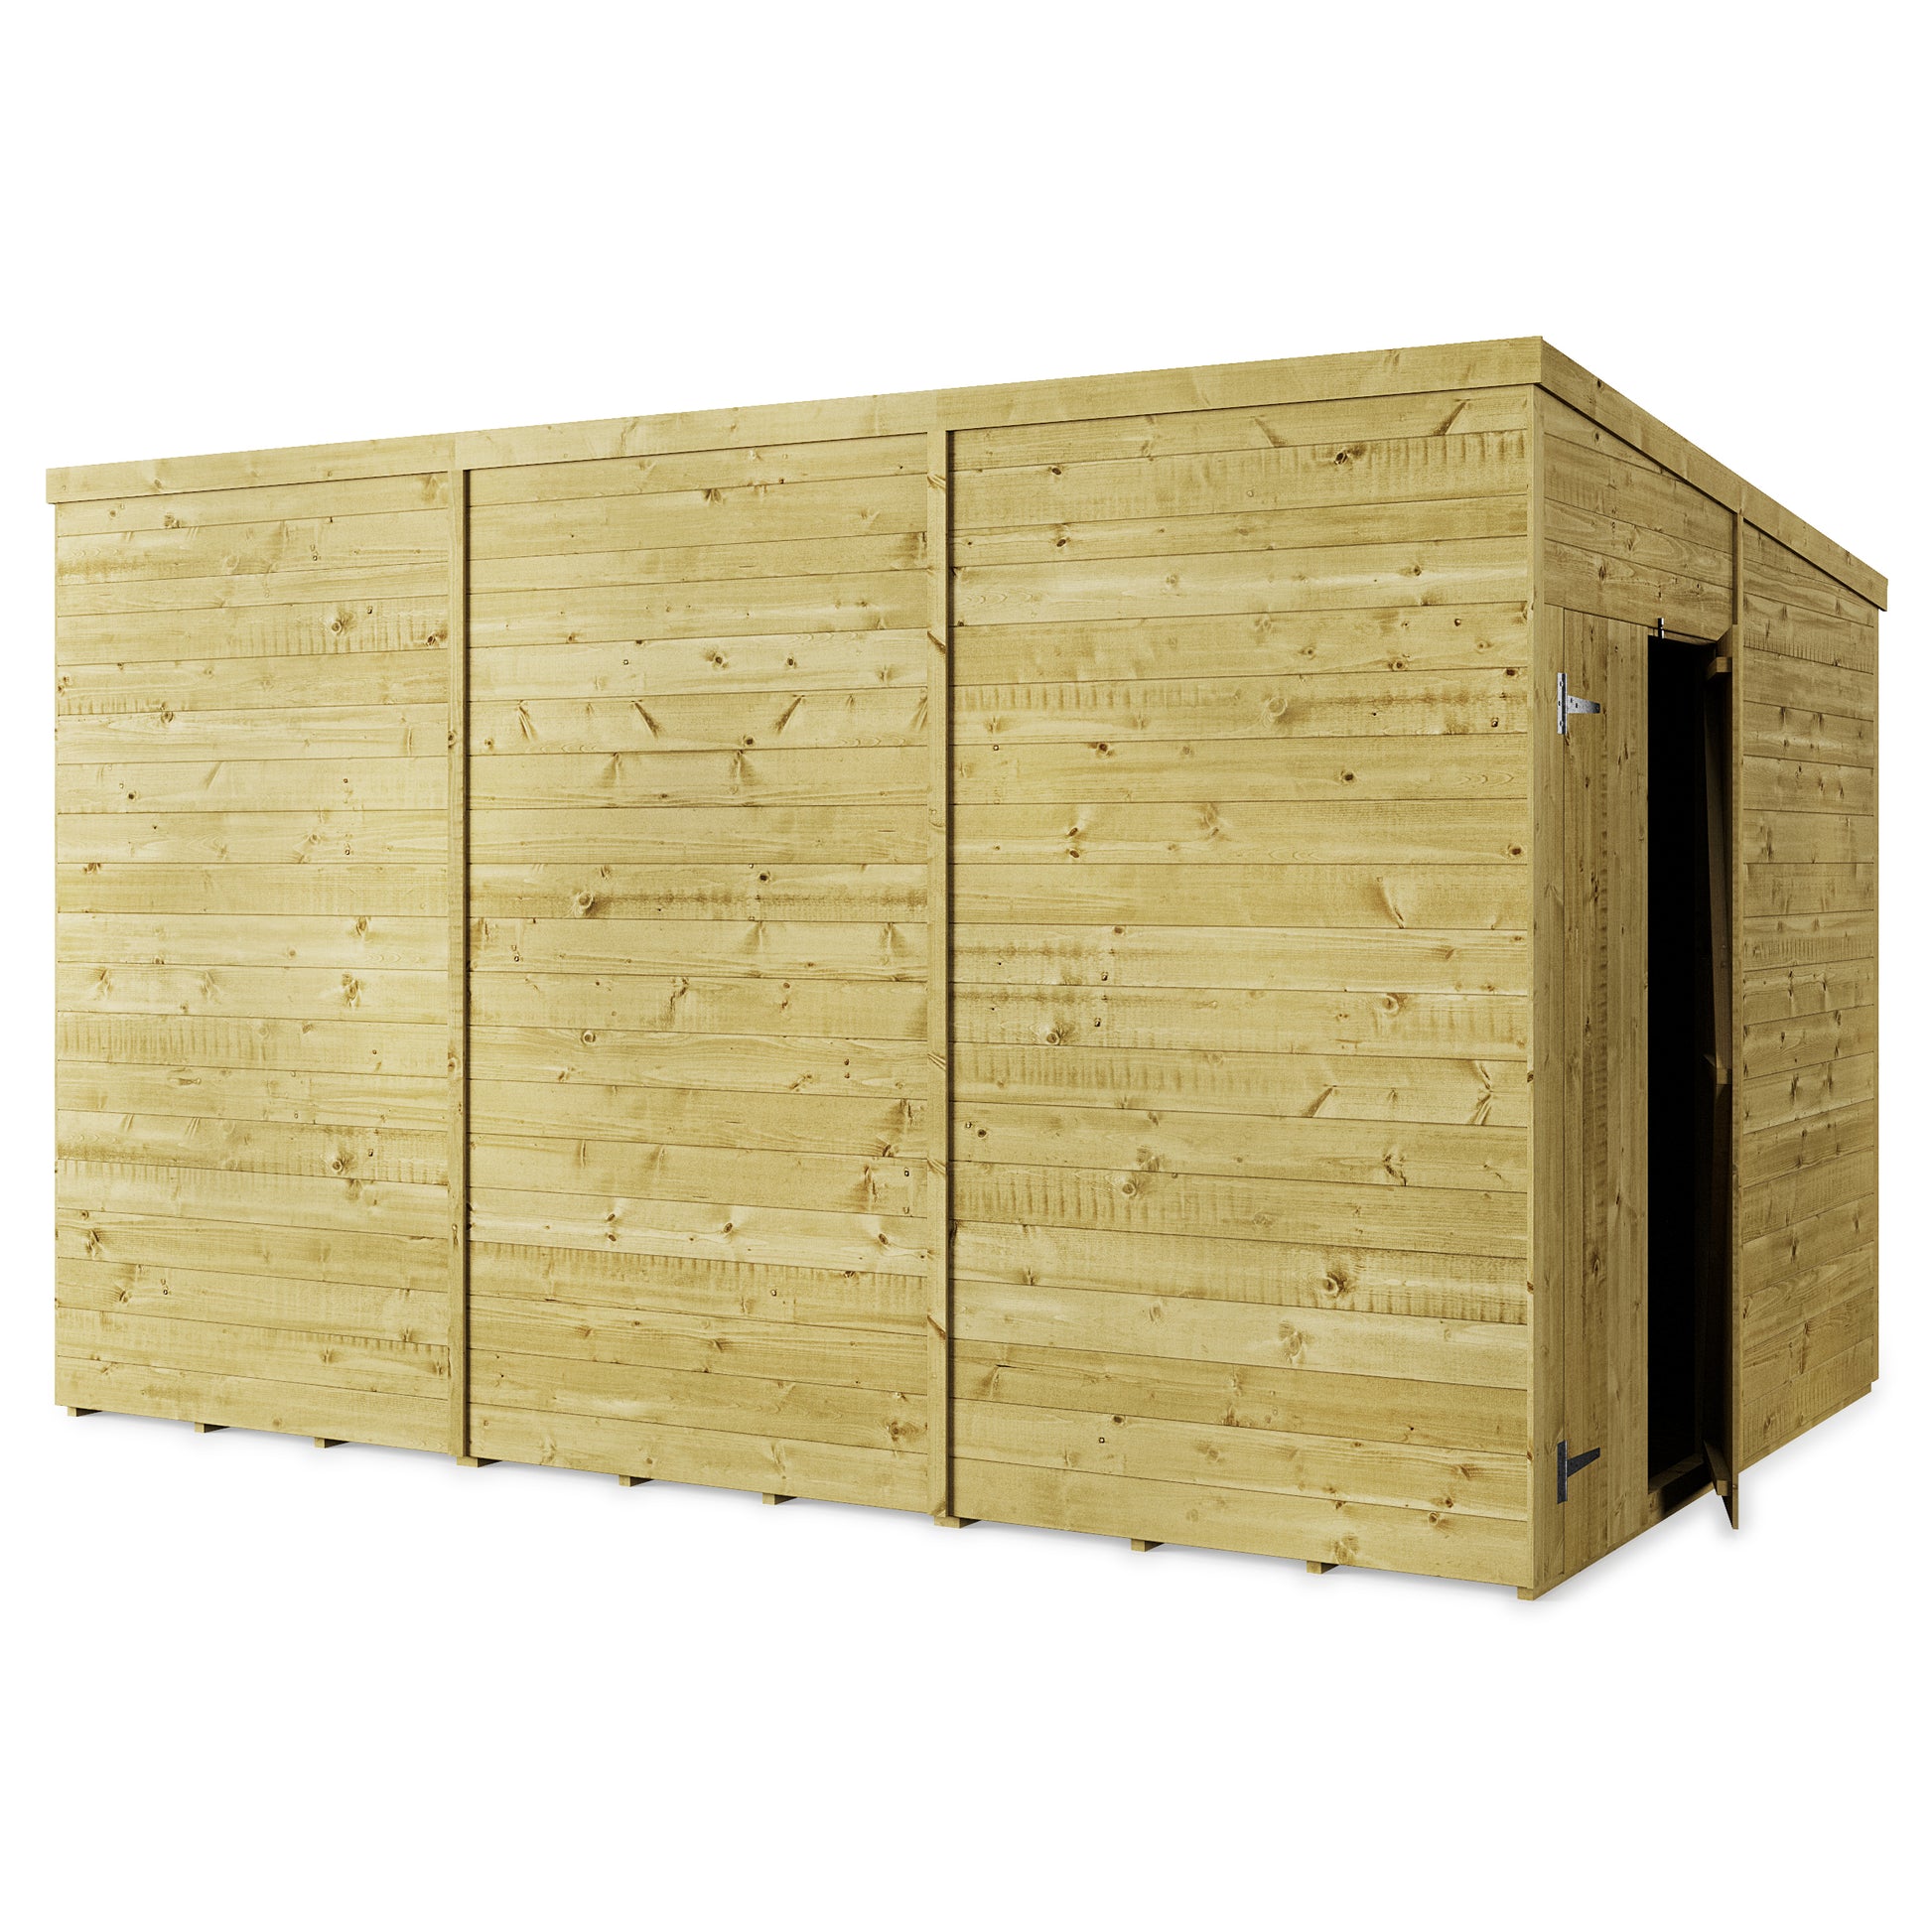 Store More 12 x 8 Tongue and Groove Pent Shed - Premium Garden